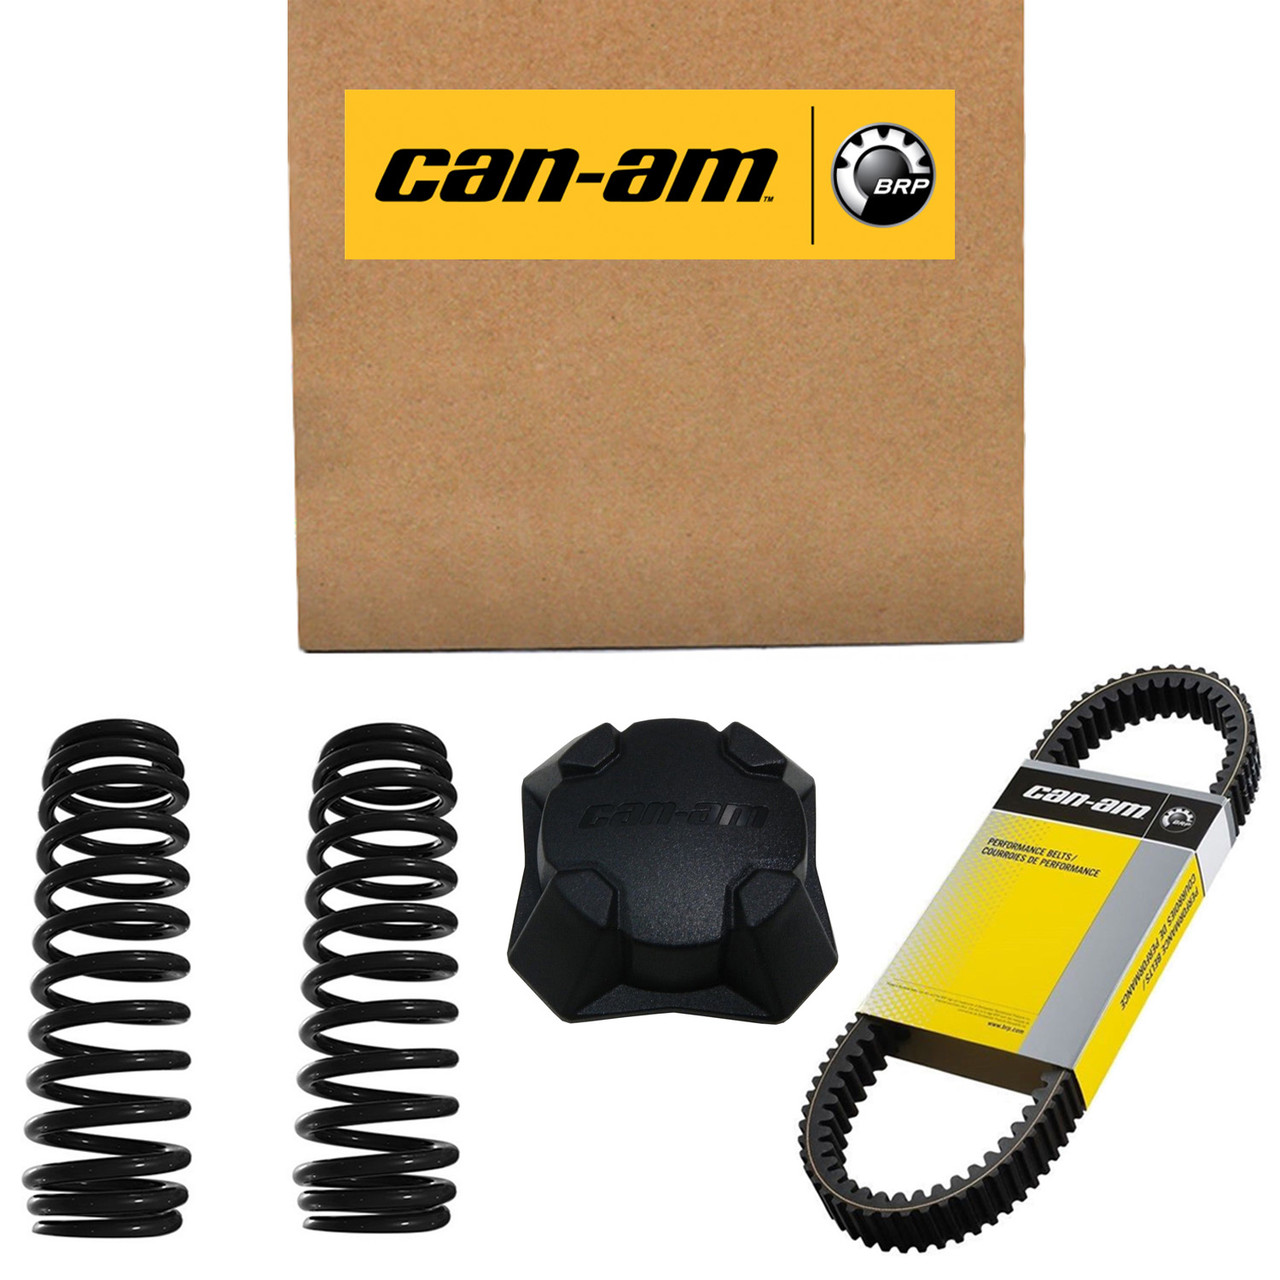 Can-Am New OEM Fr.Wheel Washer, S44611RCA000